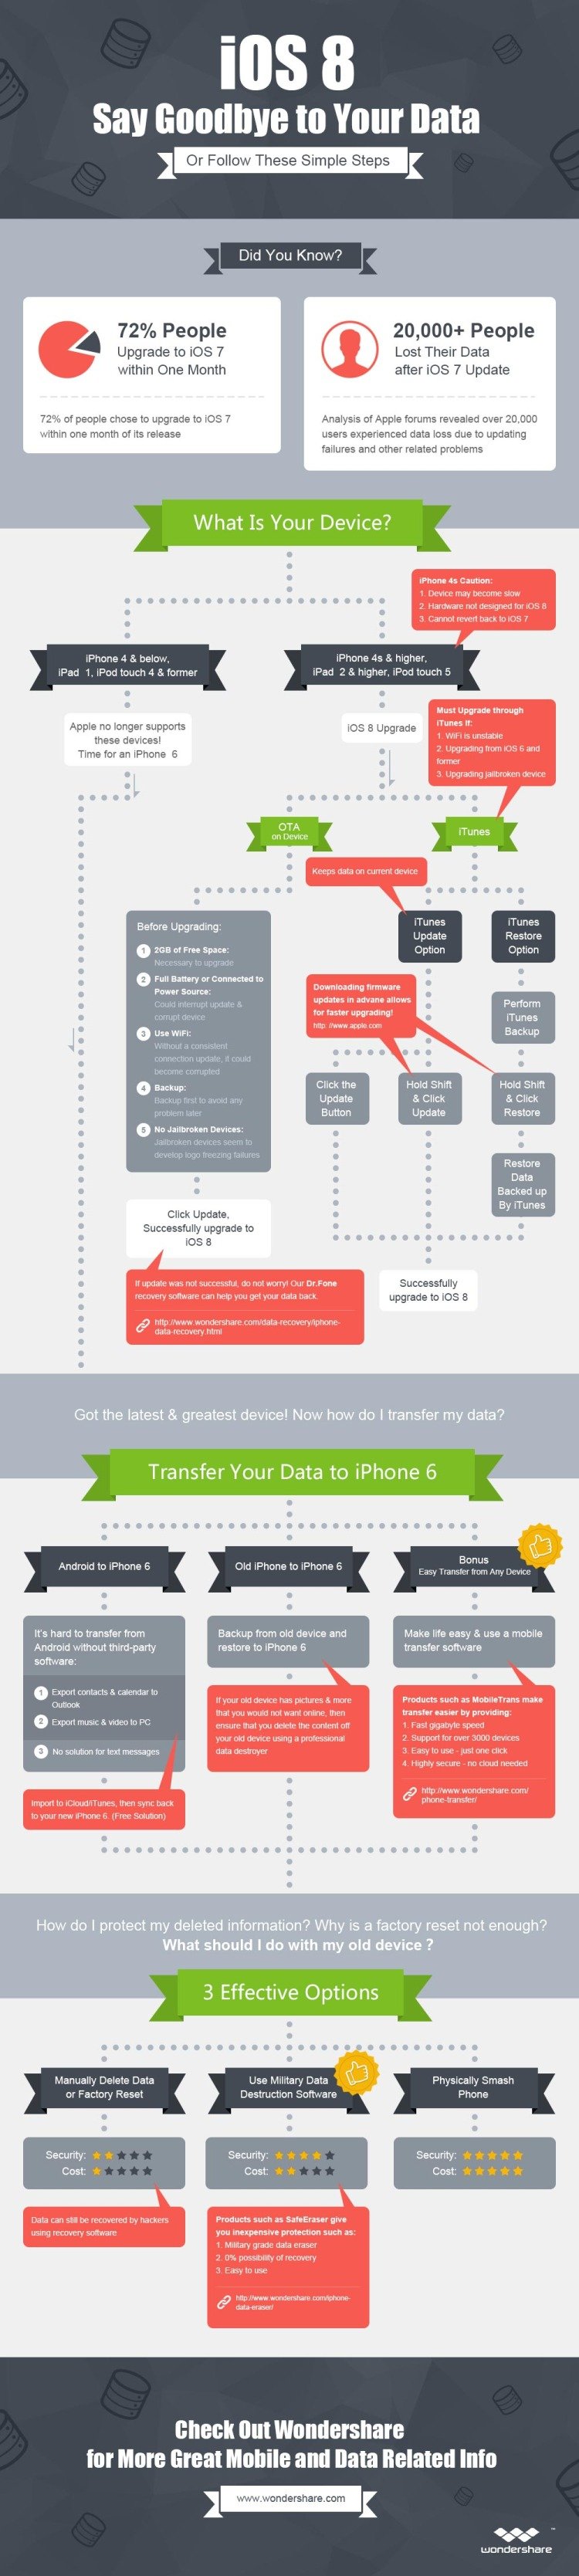 How to Not Lose Data When Upgrading to iOS 8 [Infographic]